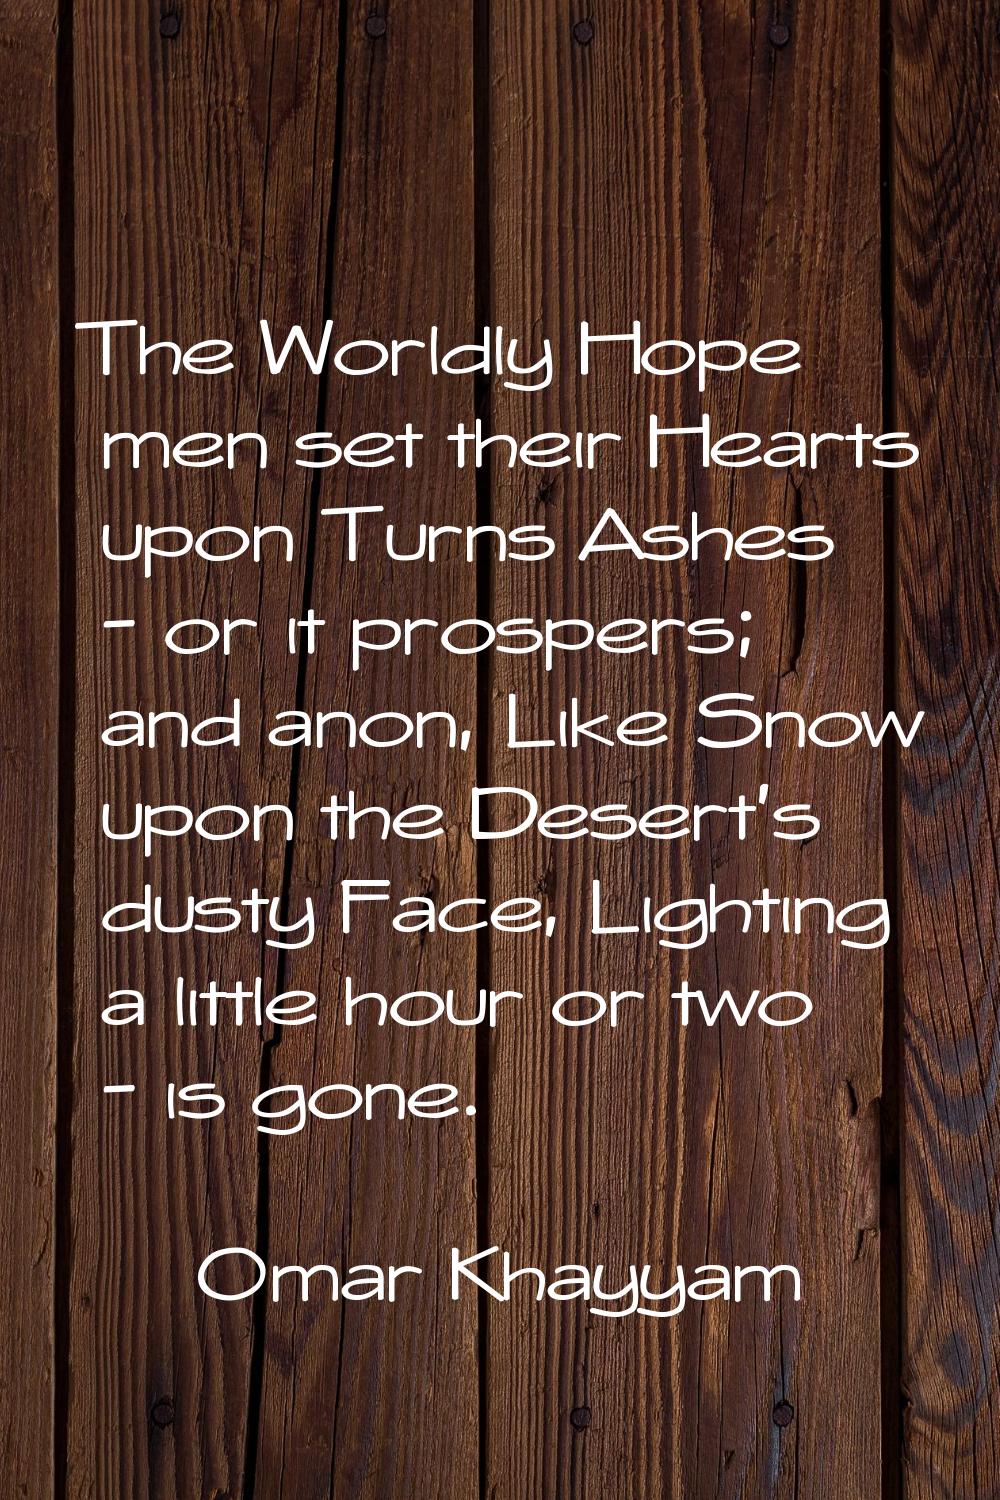 The Worldly Hope men set their Hearts upon Turns Ashes - or it prospers; and anon, Like Snow upon t